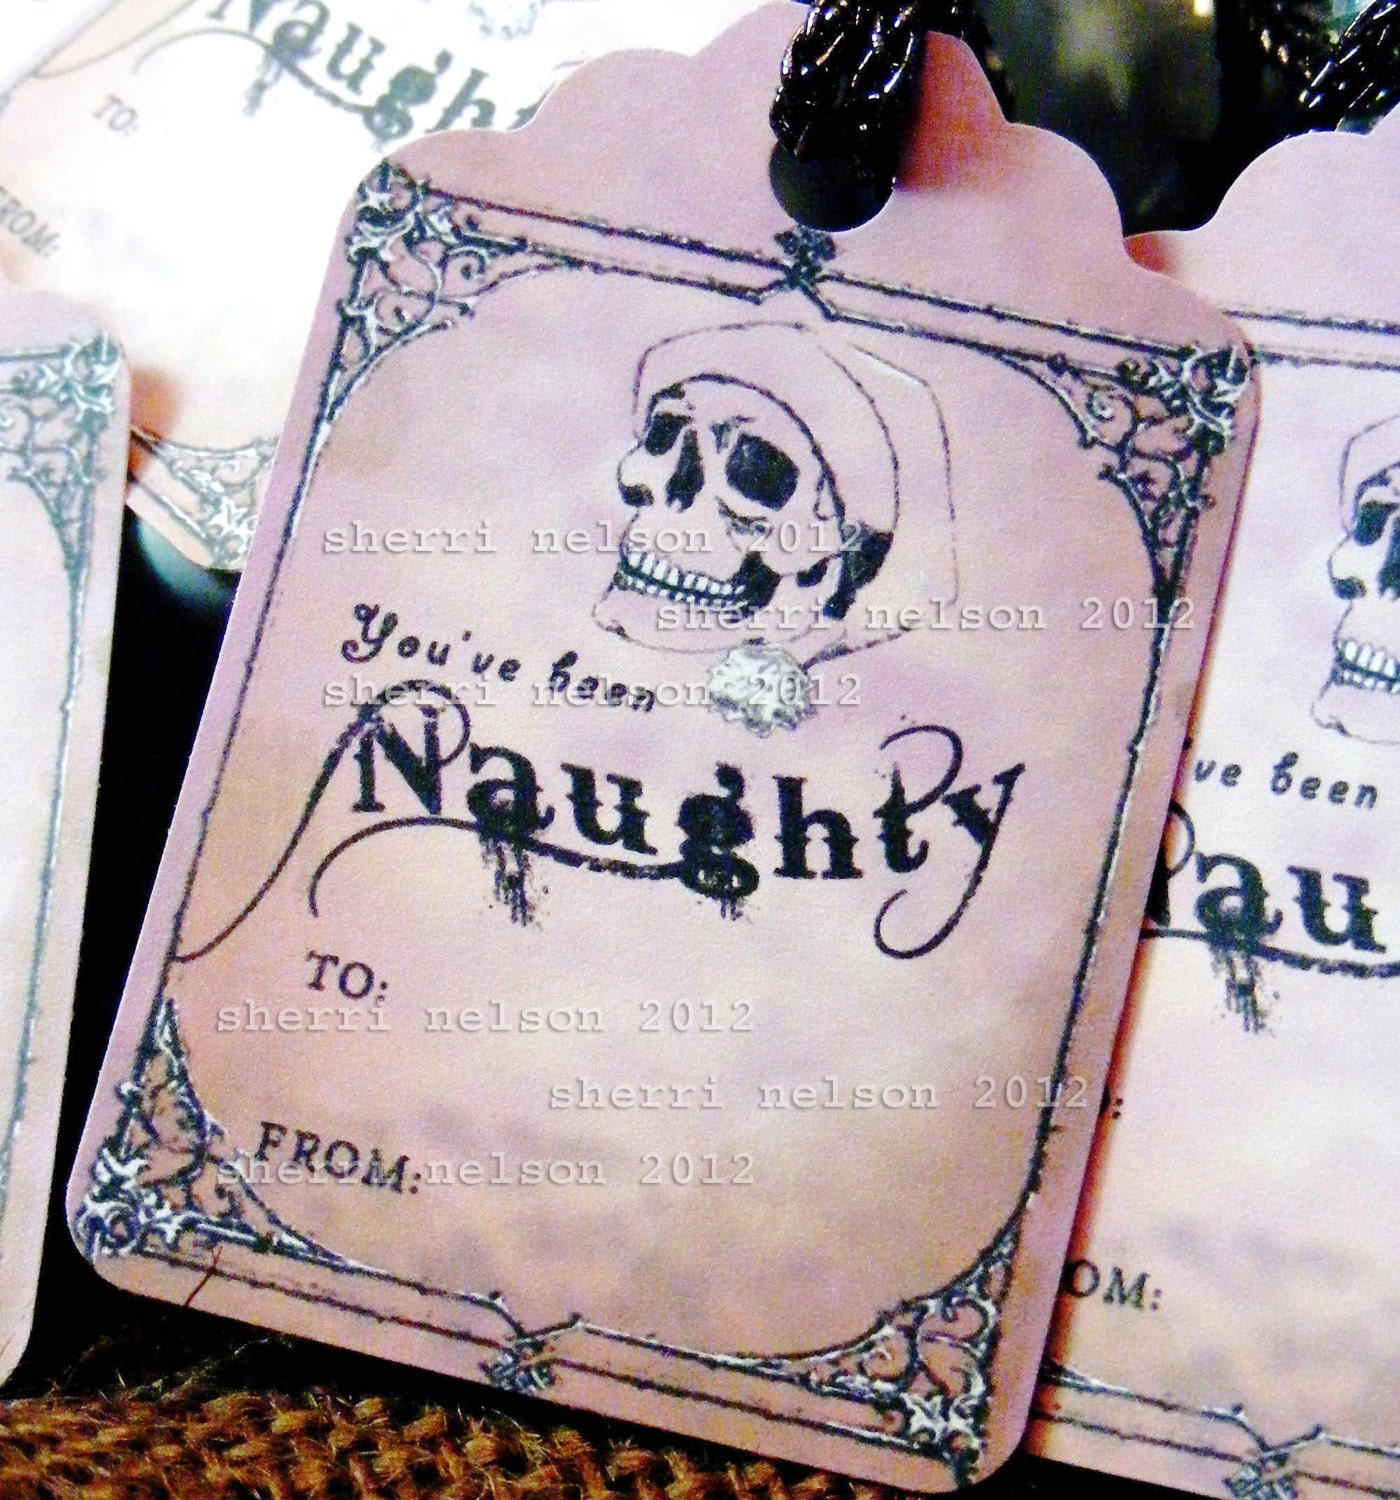 Gothic Christmas gift tags Naughty PDF. Purple Skull Santa. You've Been Naughty instant download Gothic Christmas wrap - BonesNelson